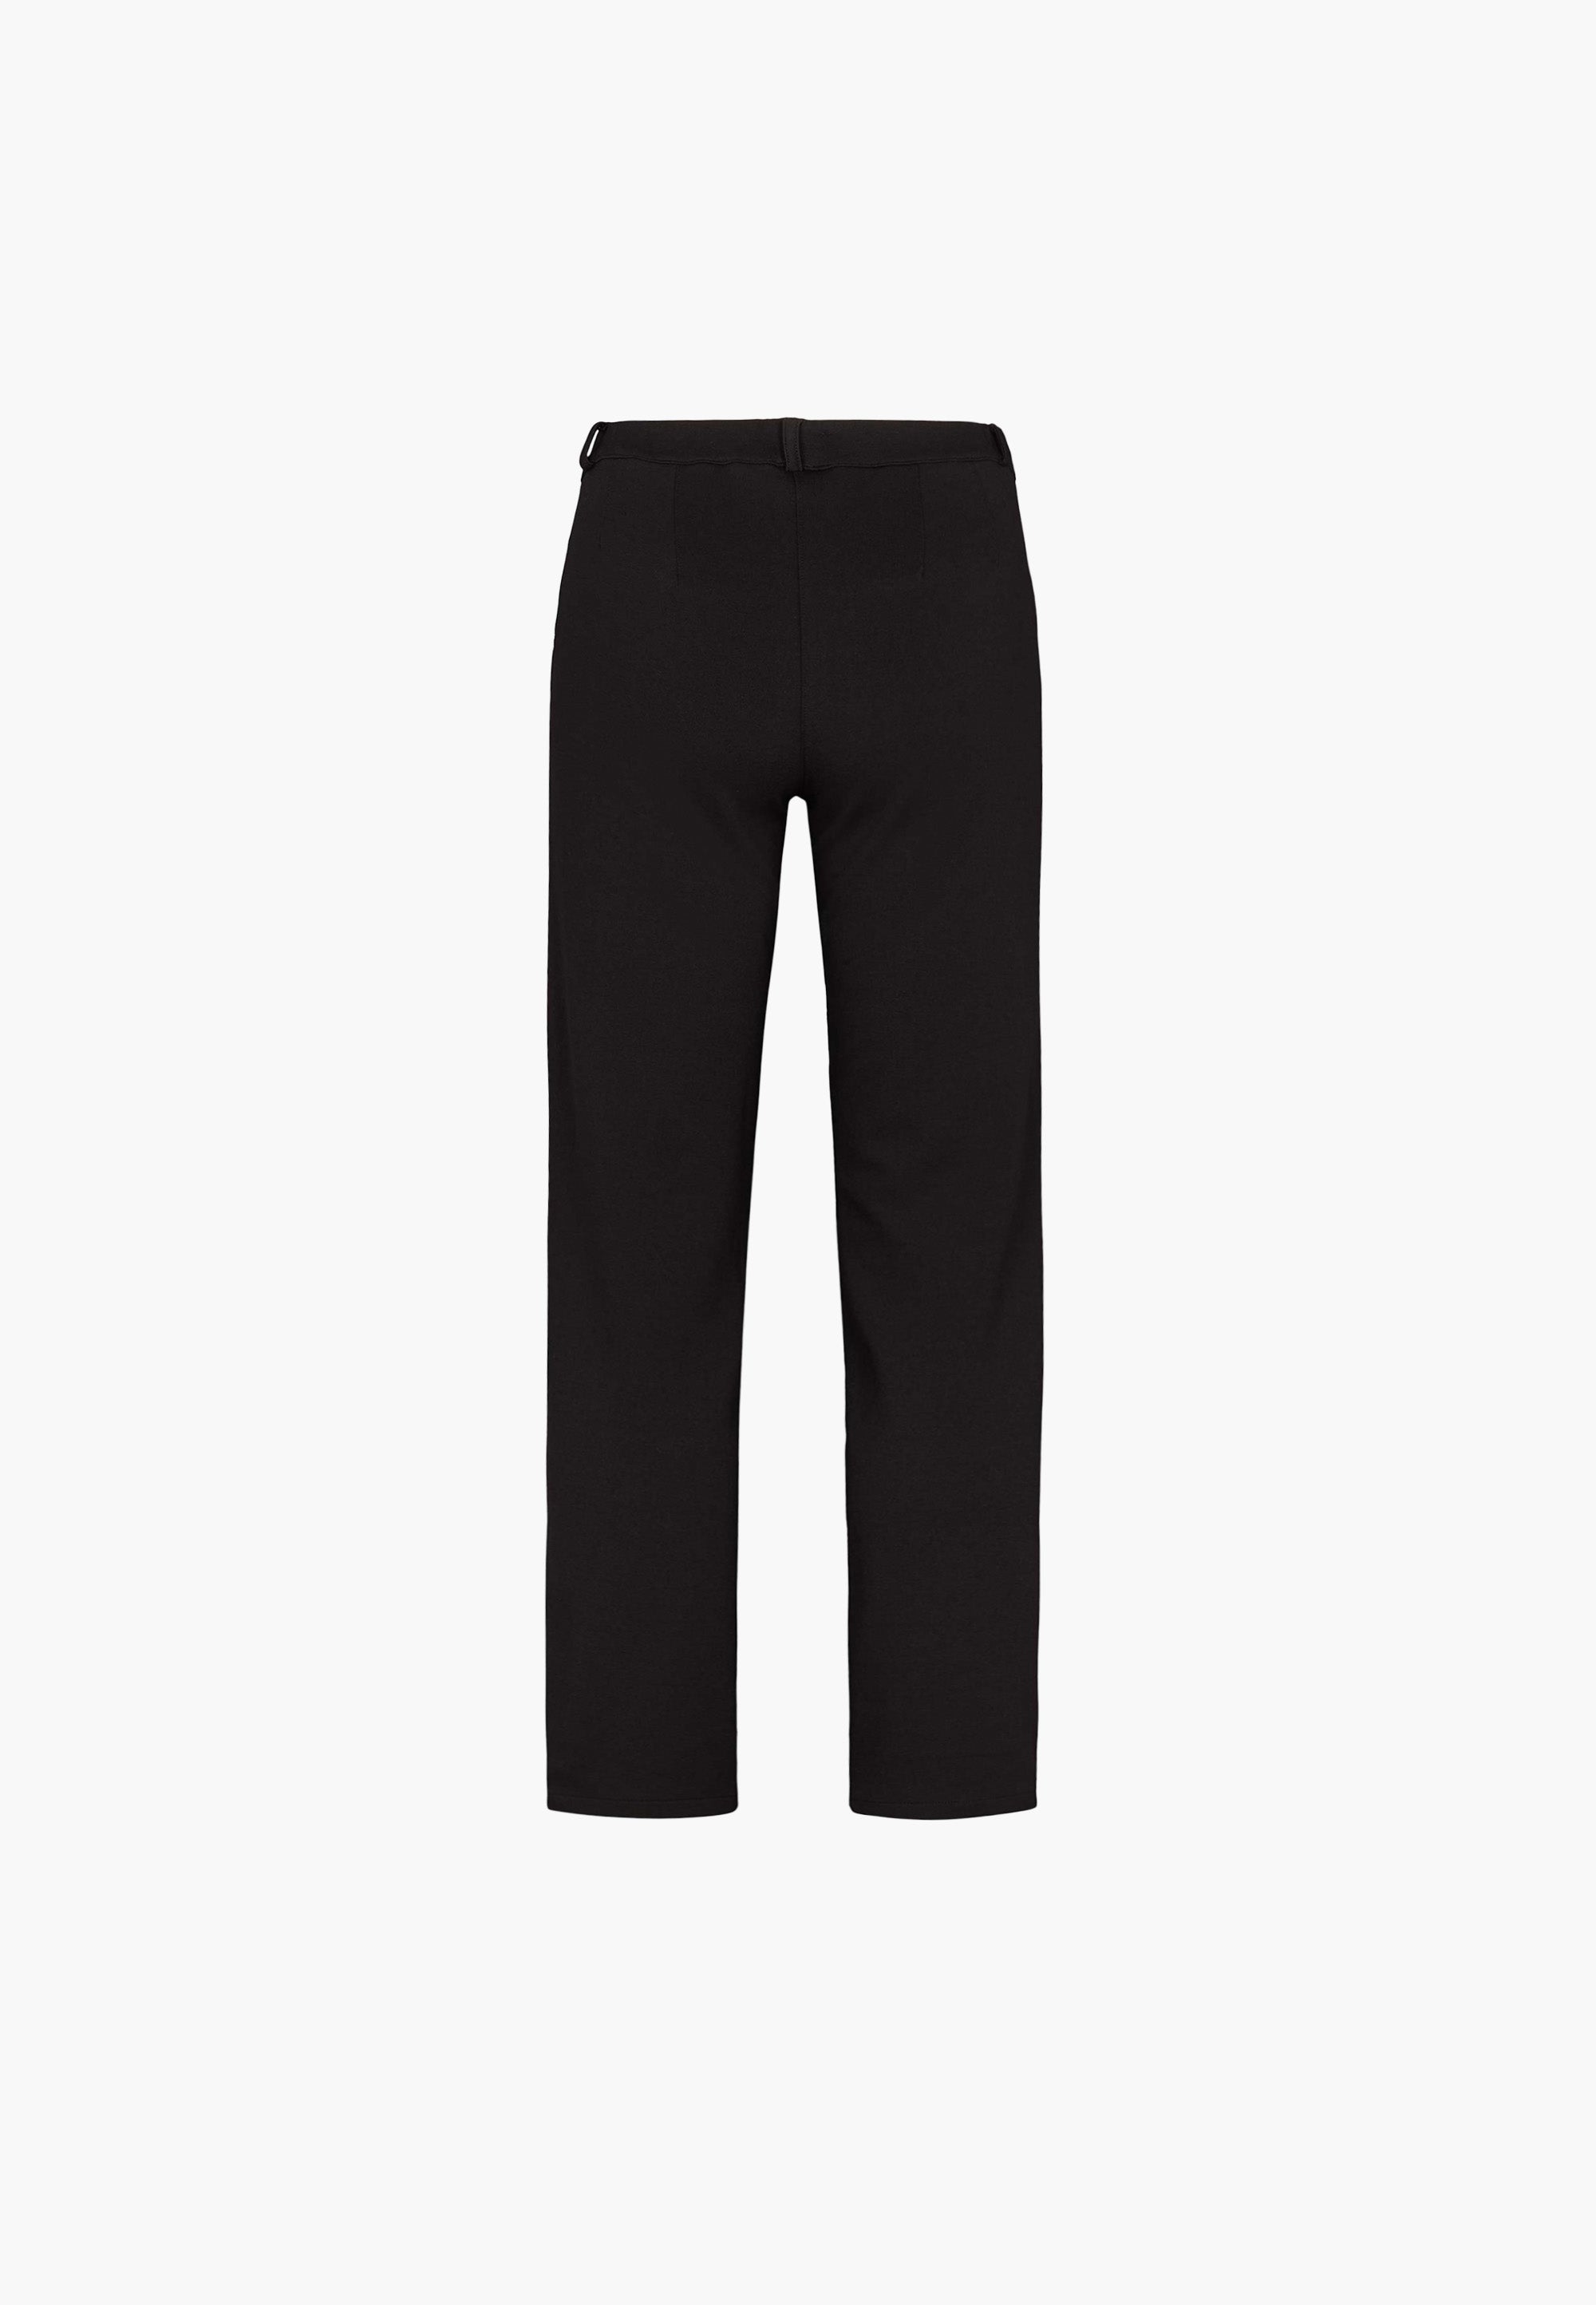 LAURIE  Ruby Straight - Medium Length Trousers STRAIGHT 99143 Black brushed